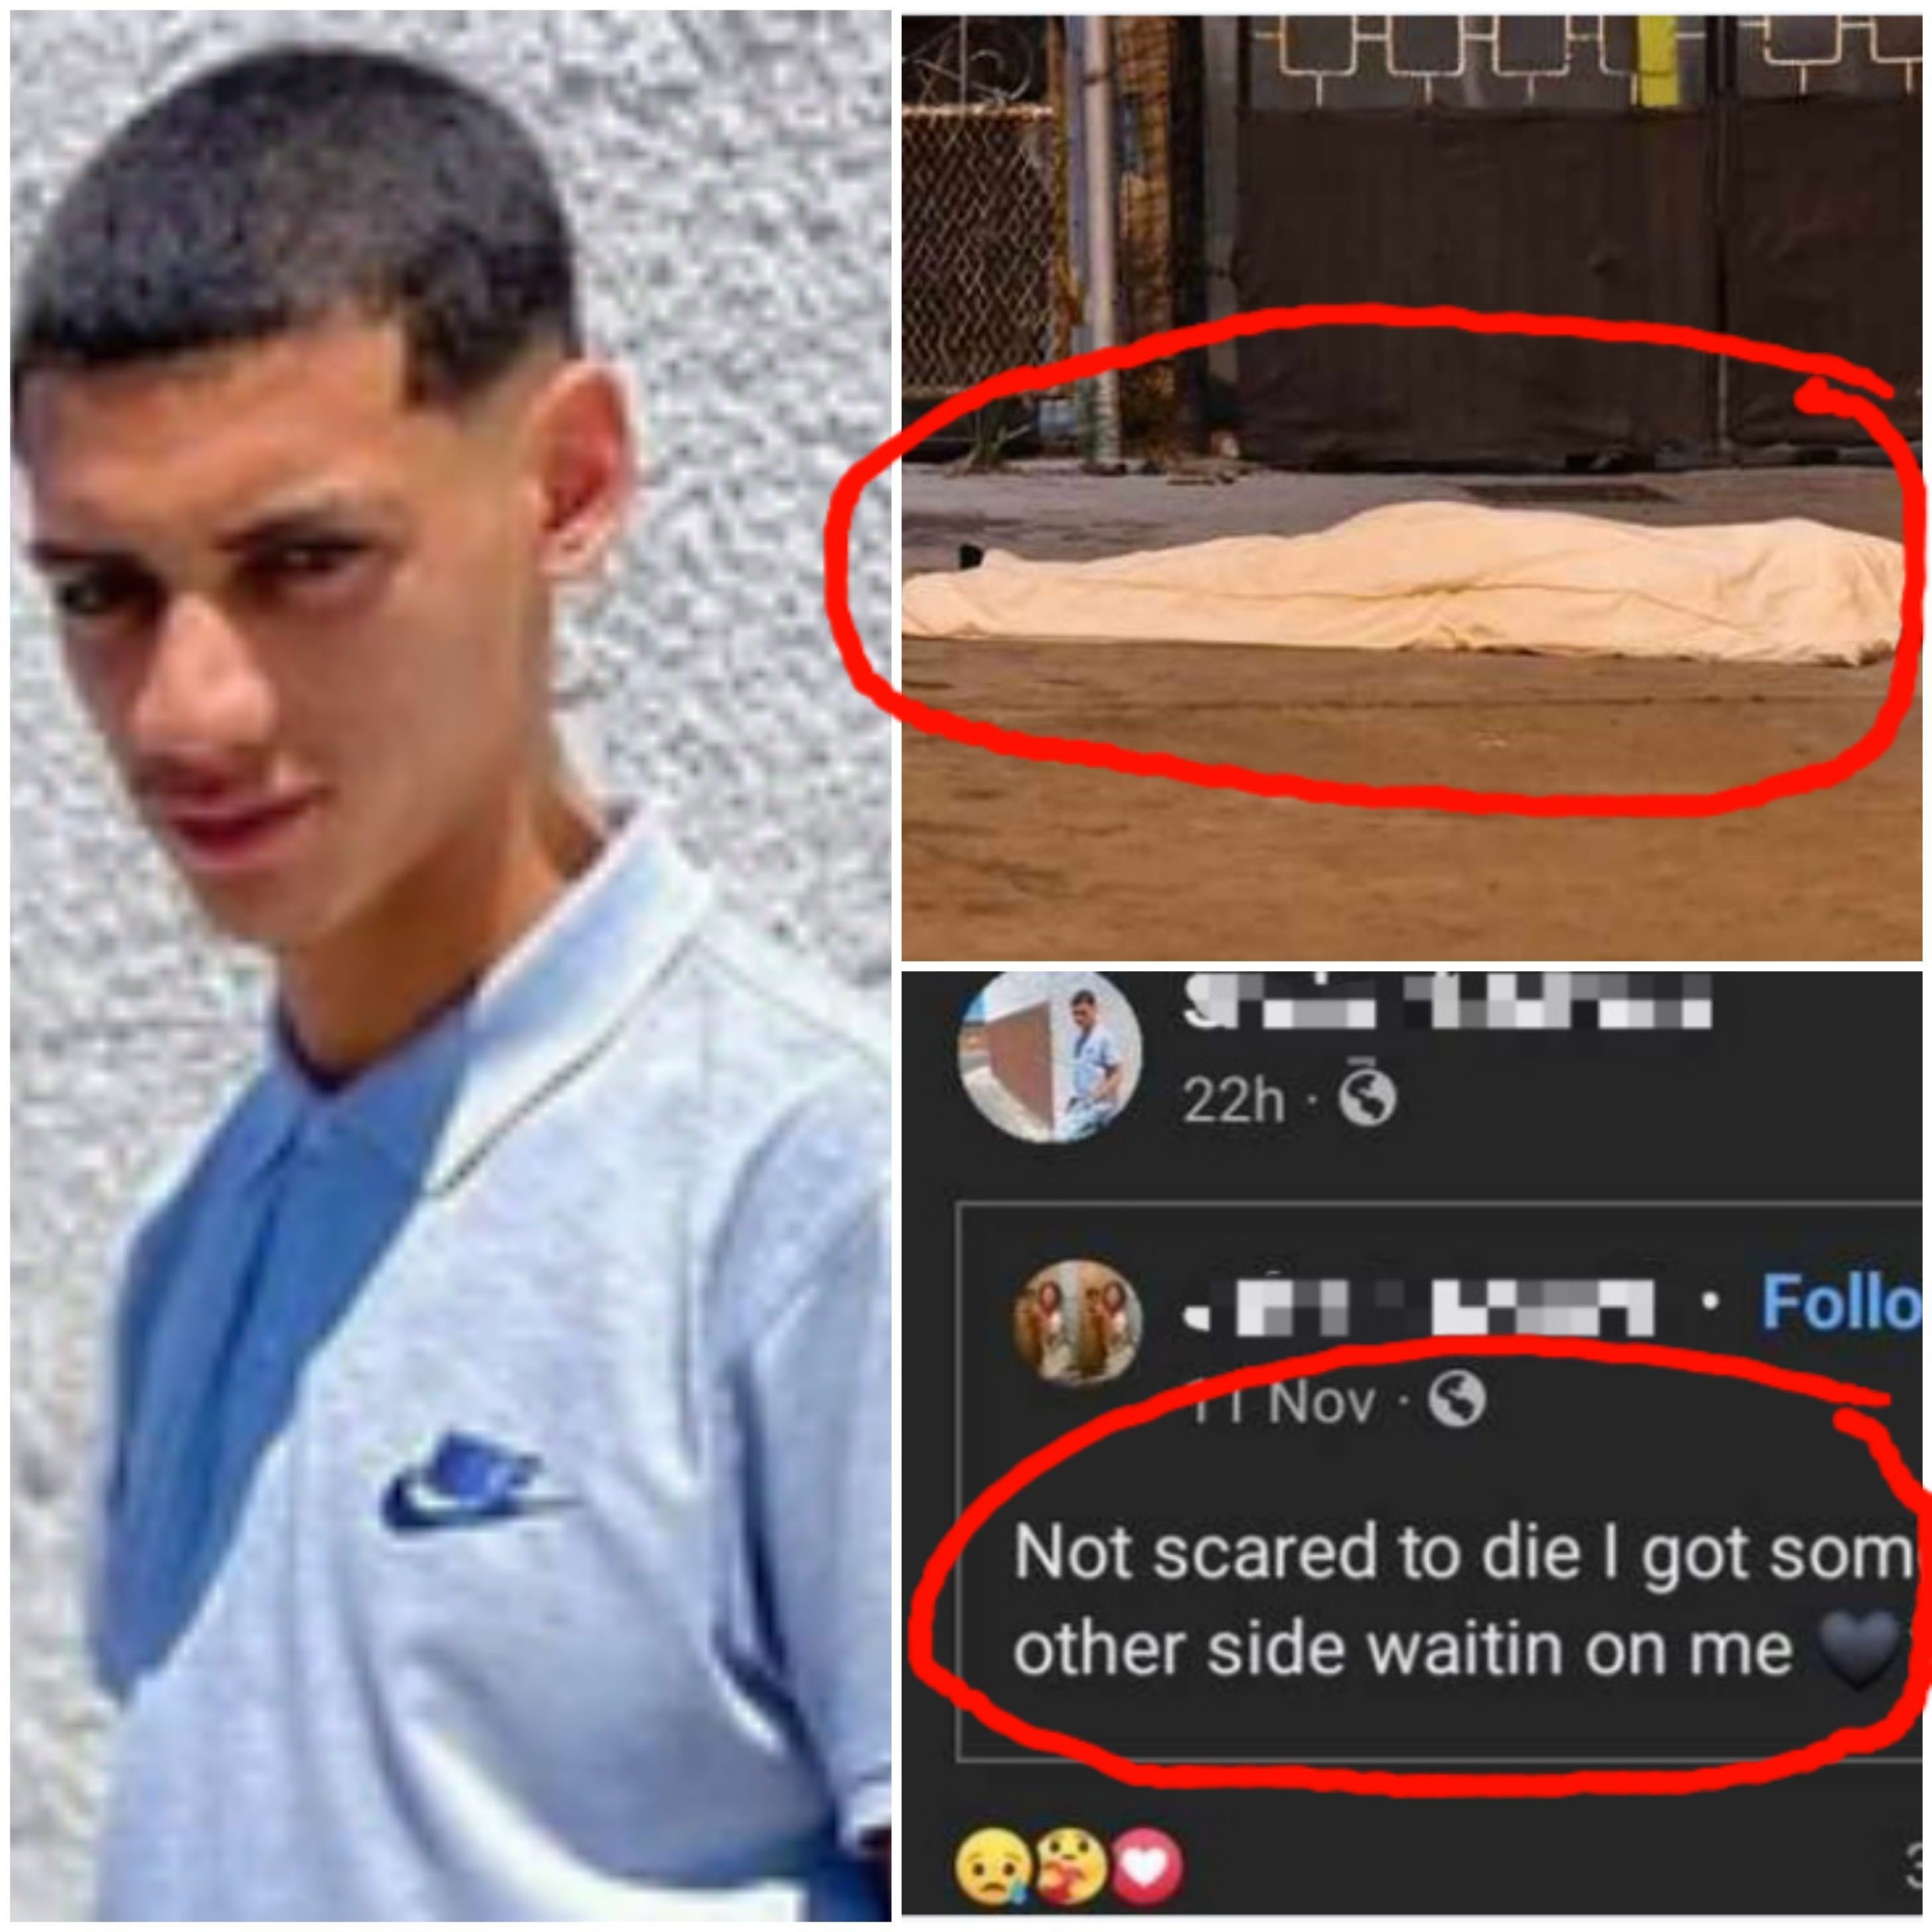 A young boy anticipated death on Facebook a couple of hours before he was gunned down 1